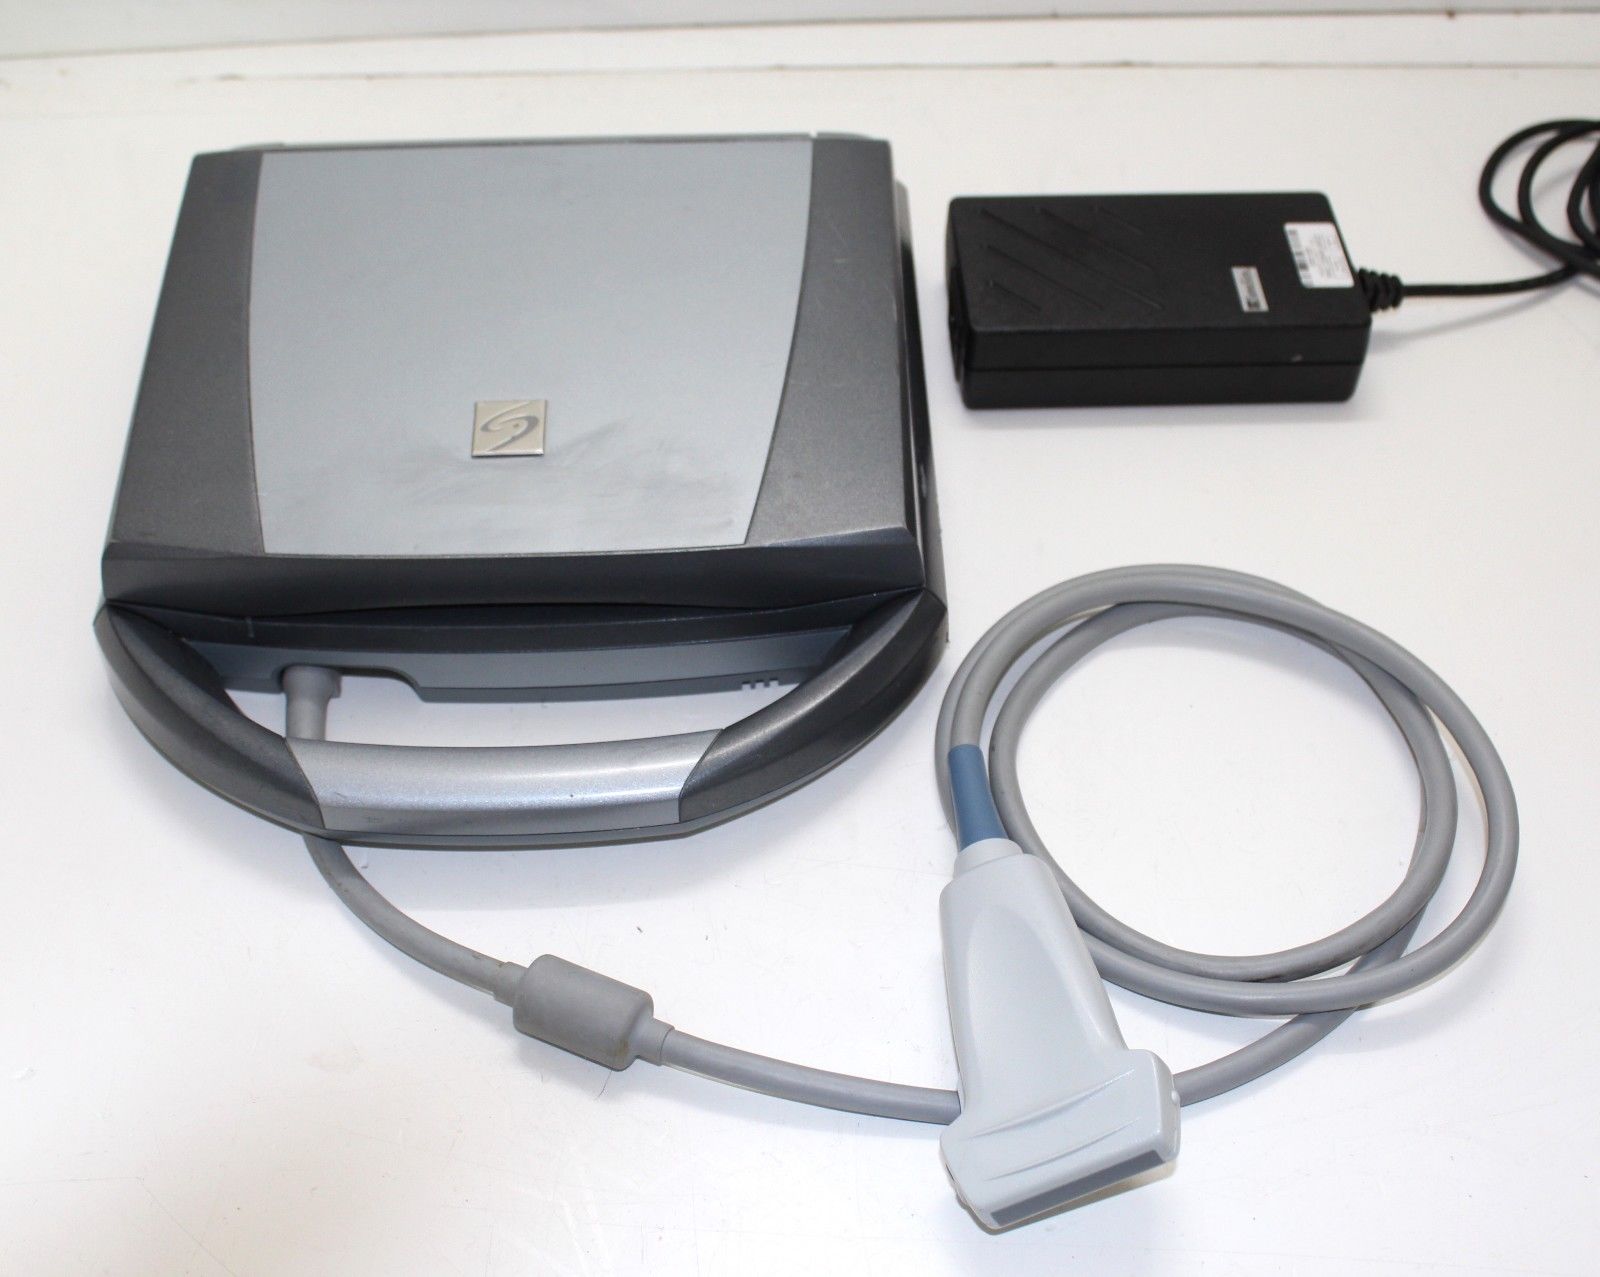 Sonosite M-Turbo Ultrasound with HFL38x Linear Probe ( serviced April 2018) DIAGNOSTIC ULTRASOUND MACHINES FOR SALE